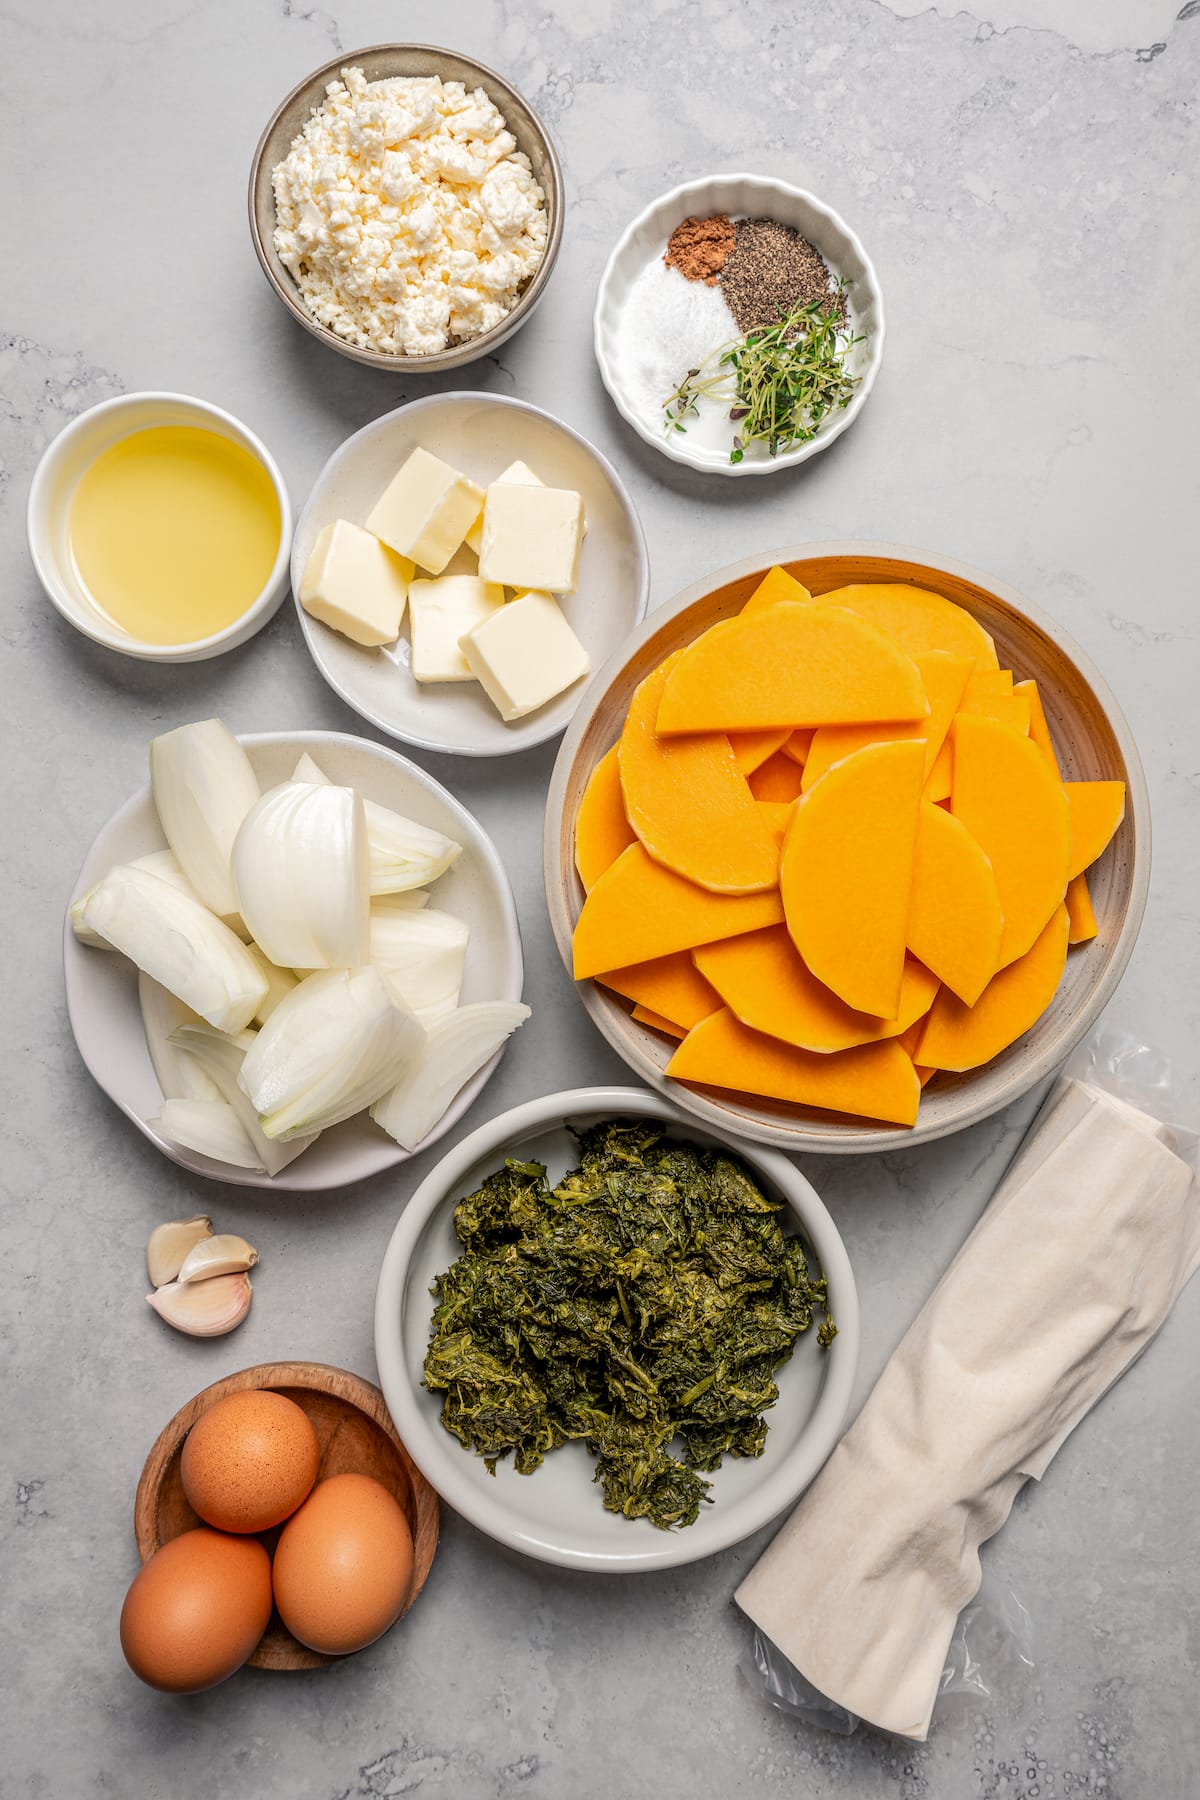 The ingredients for butternut squash and spinach pie.